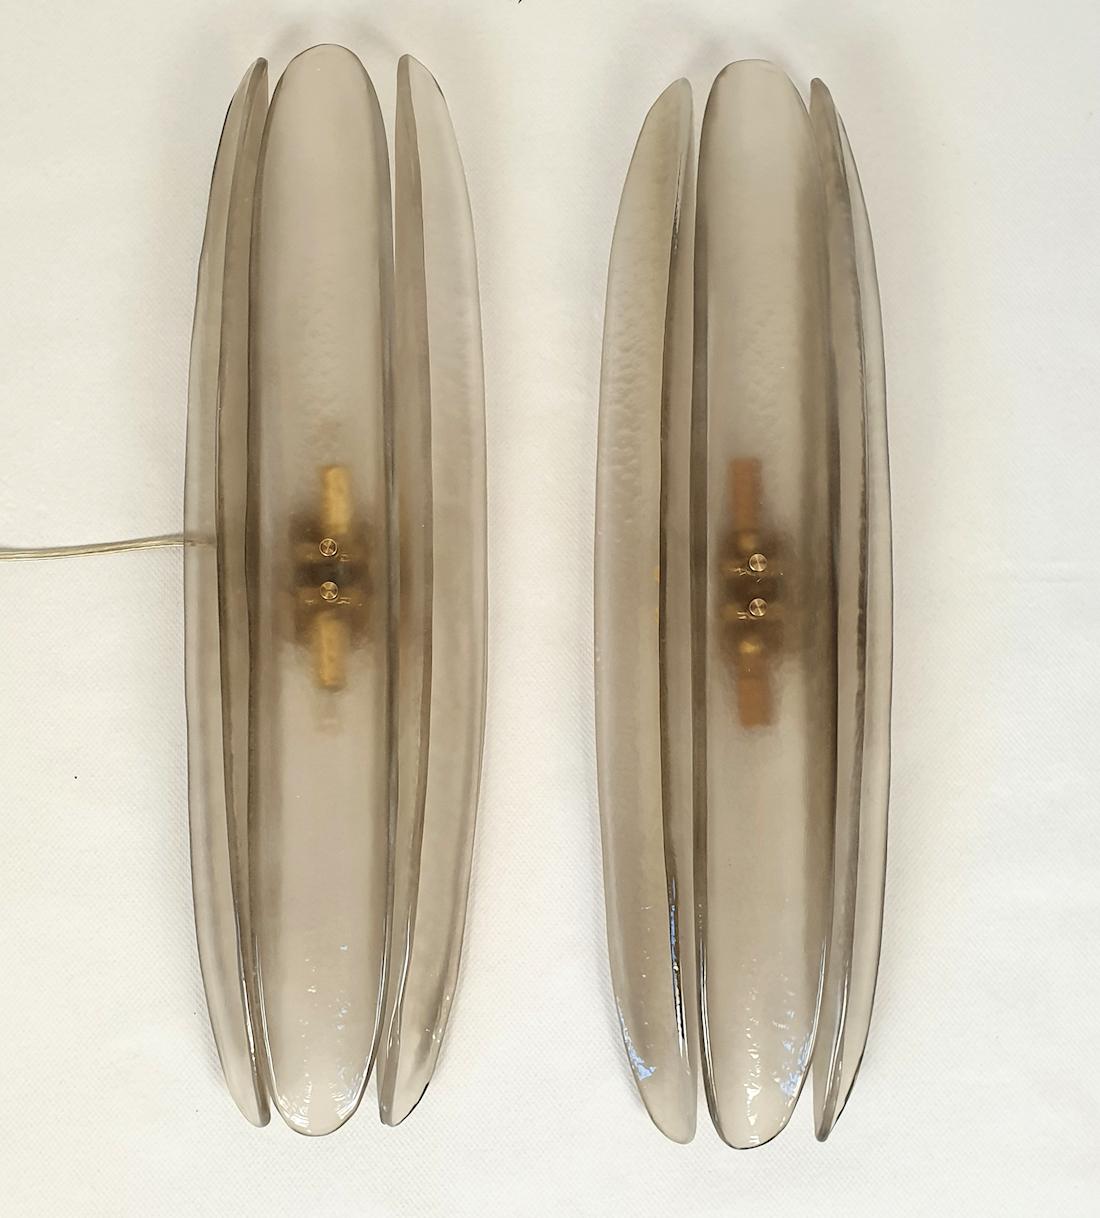 Mid-Century Modern pair of Murano glass wall sconces, attributed to Mazzega, Italy 1980s.
The vintage sconces are made of 3 long and curved tiles in Murano glass, in a beautiful semi-transparent taupe/sand color.
The sconces have 2 lights each and